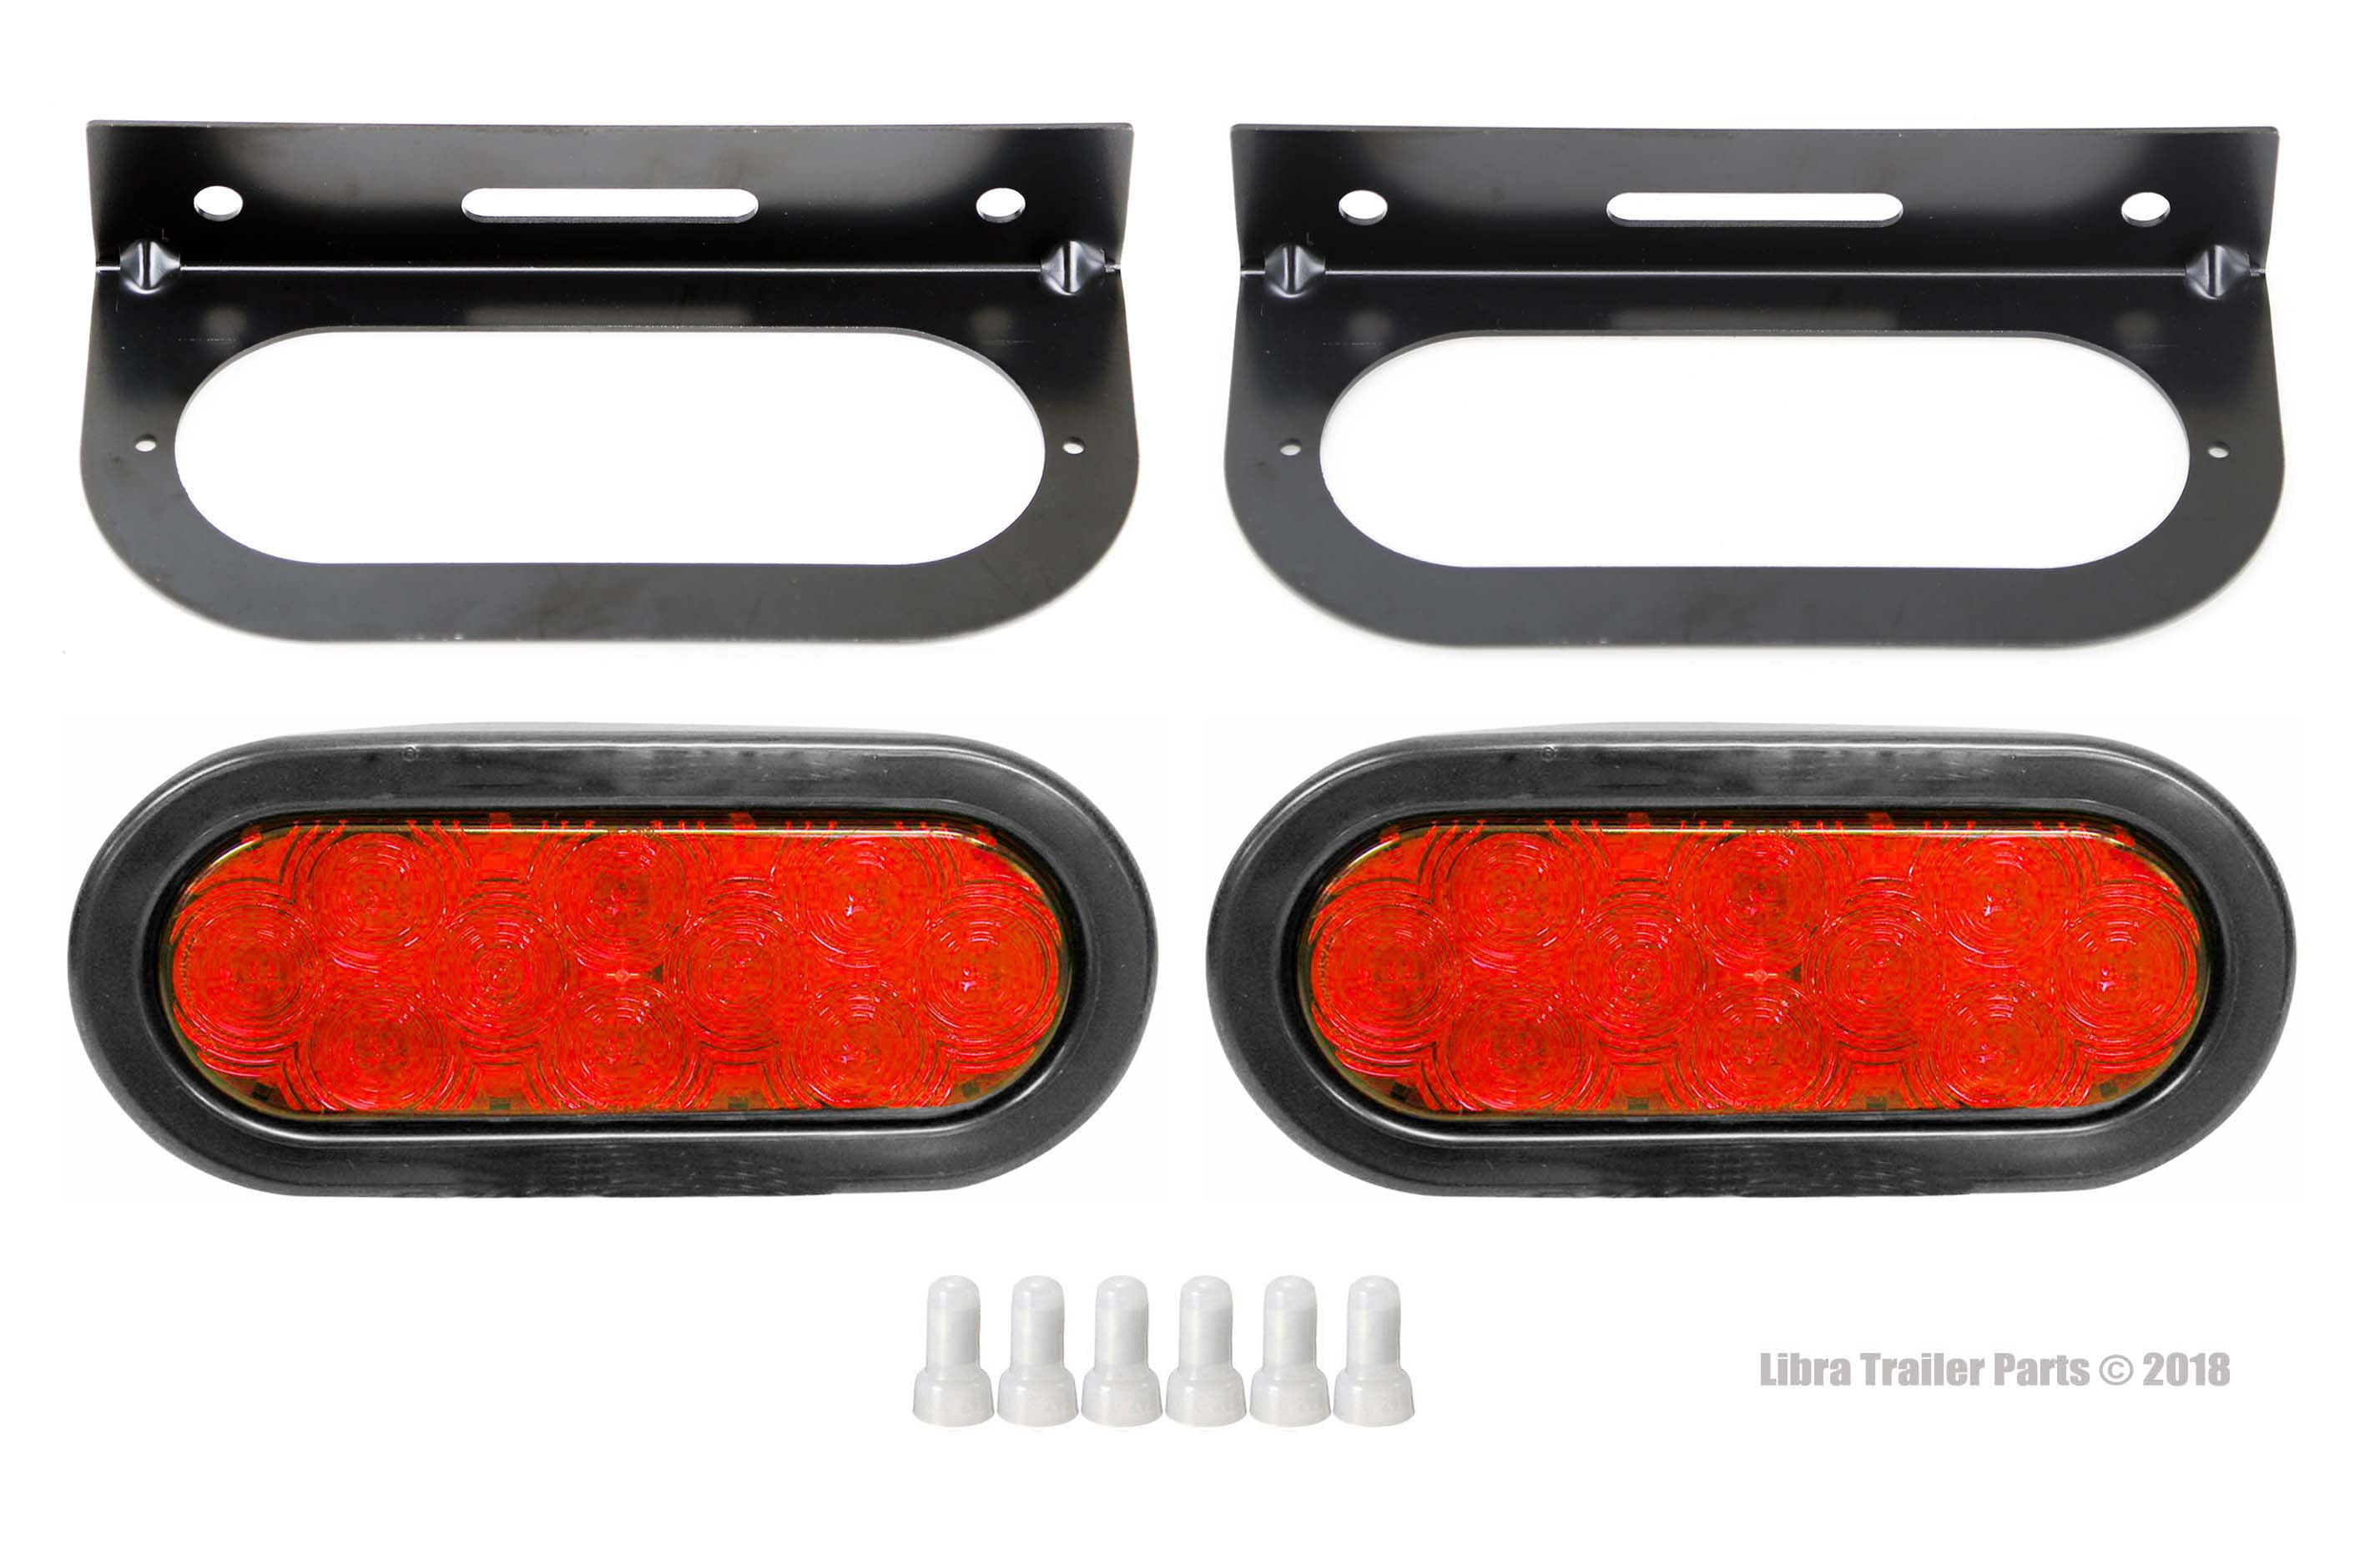 Fits 6" Oval LED Stop Turn Tail Lights Double Stainless Steel Brackets 2 